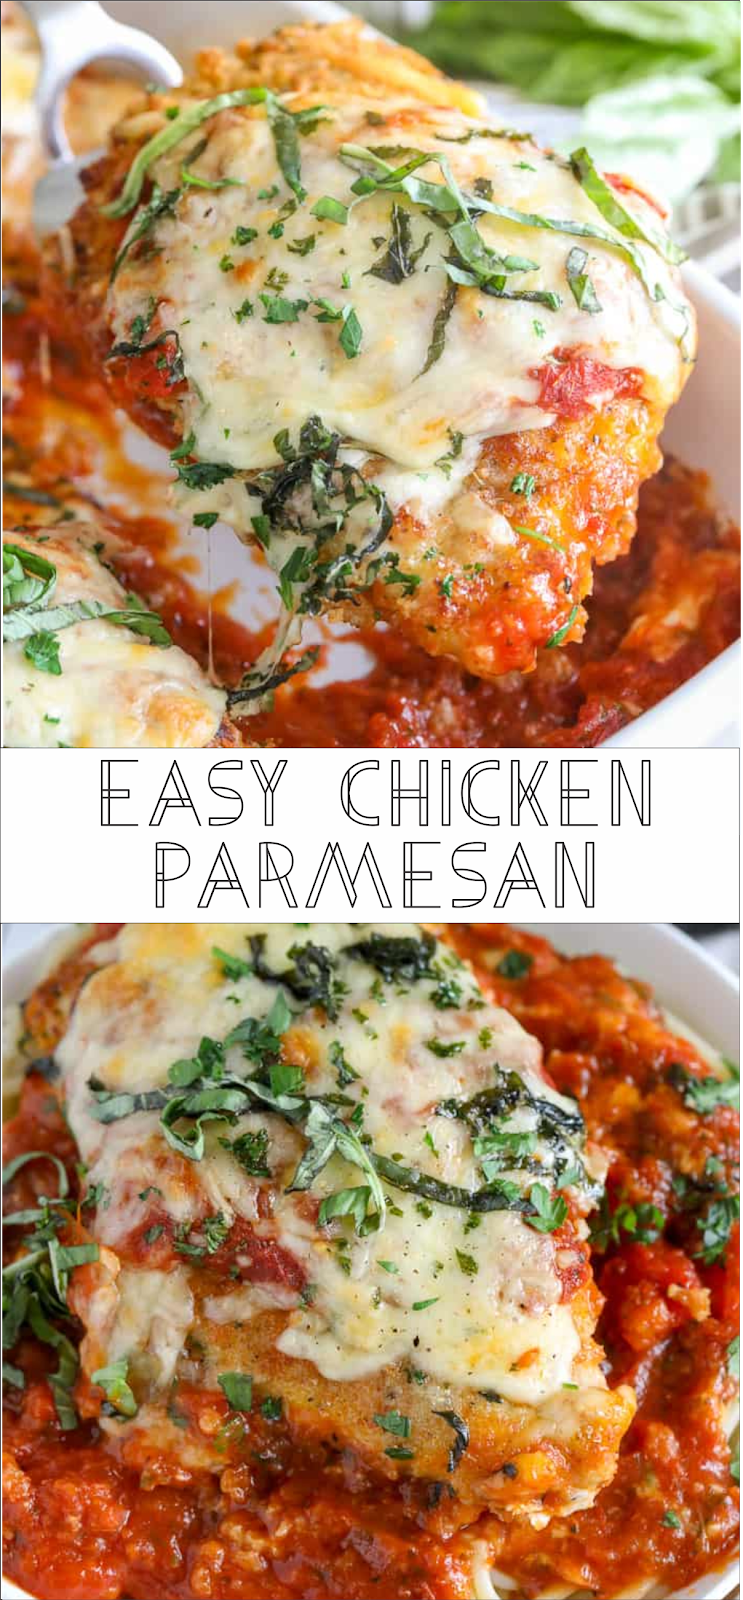 Easy Chicken Parmesan | Floats CO